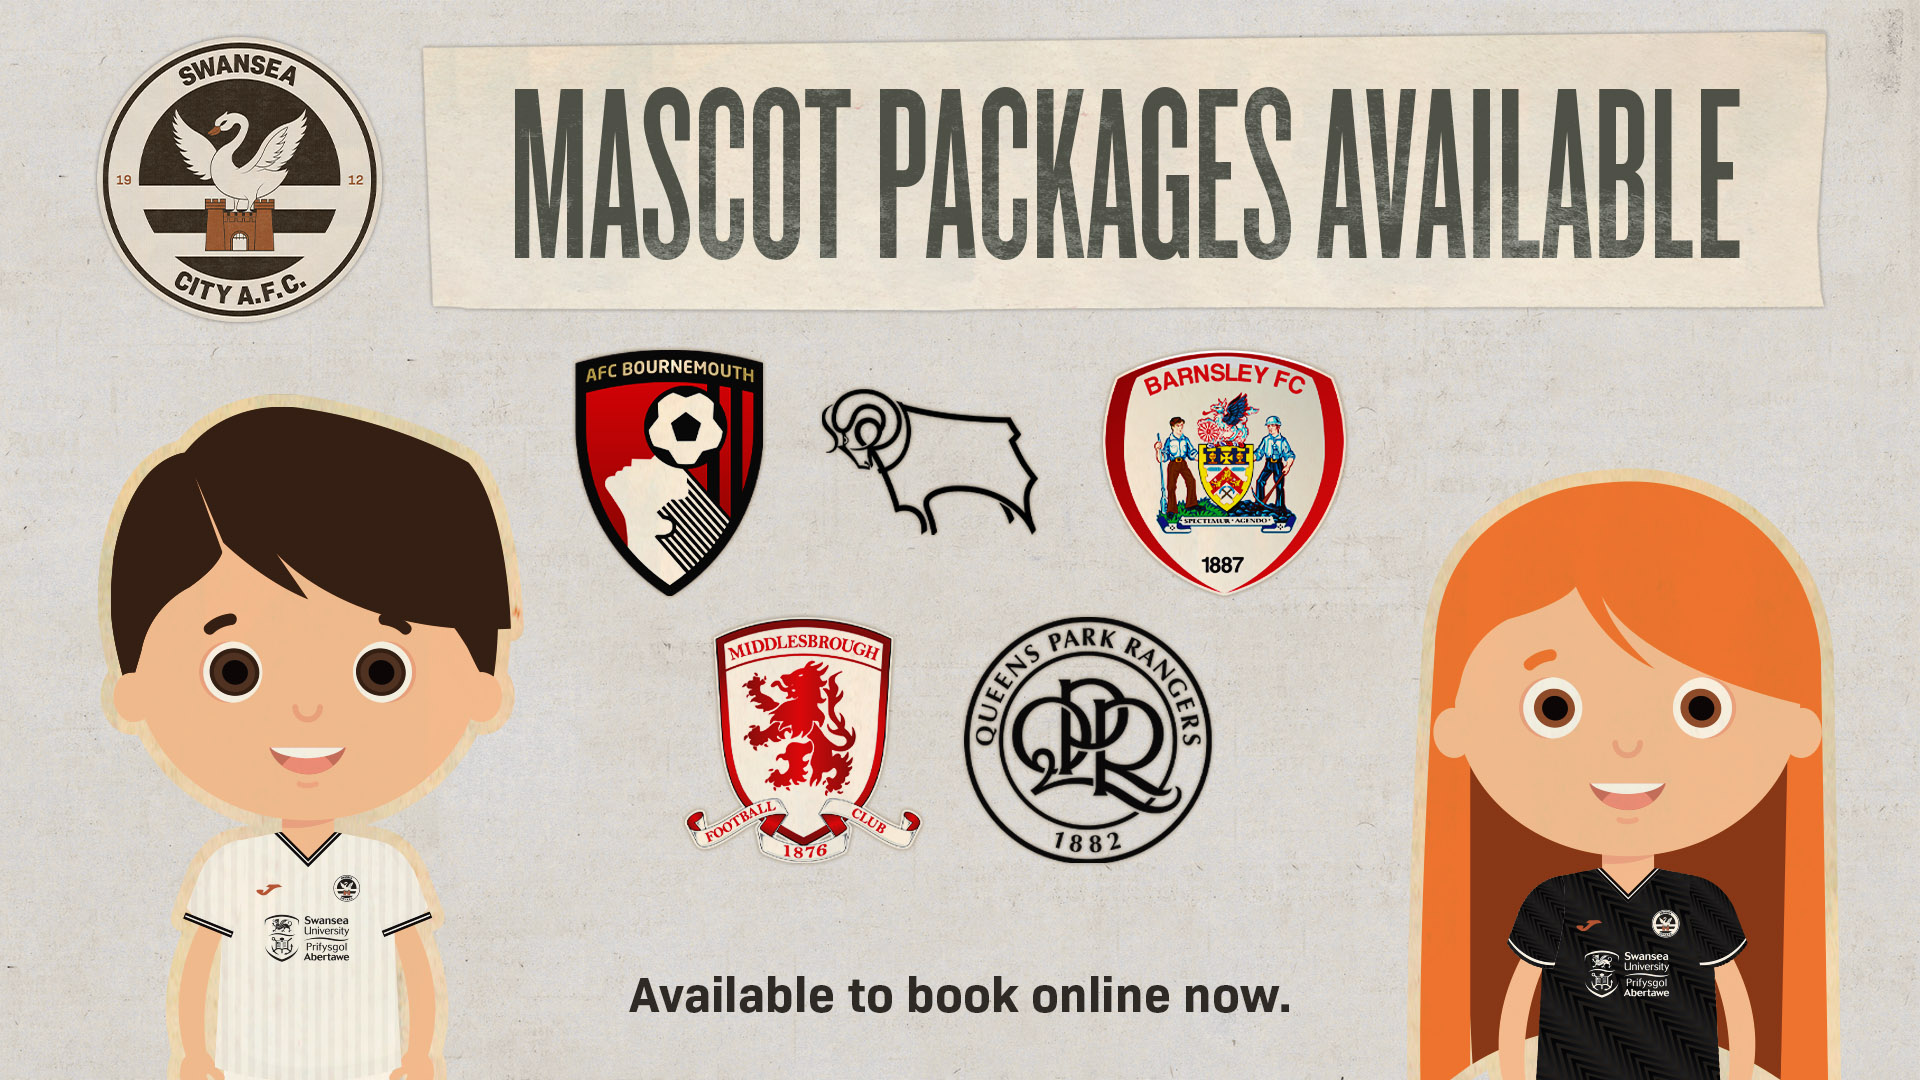 Mascot packages available - Bournemouth, Derby, Barnsley, Middlesbrough, QPR